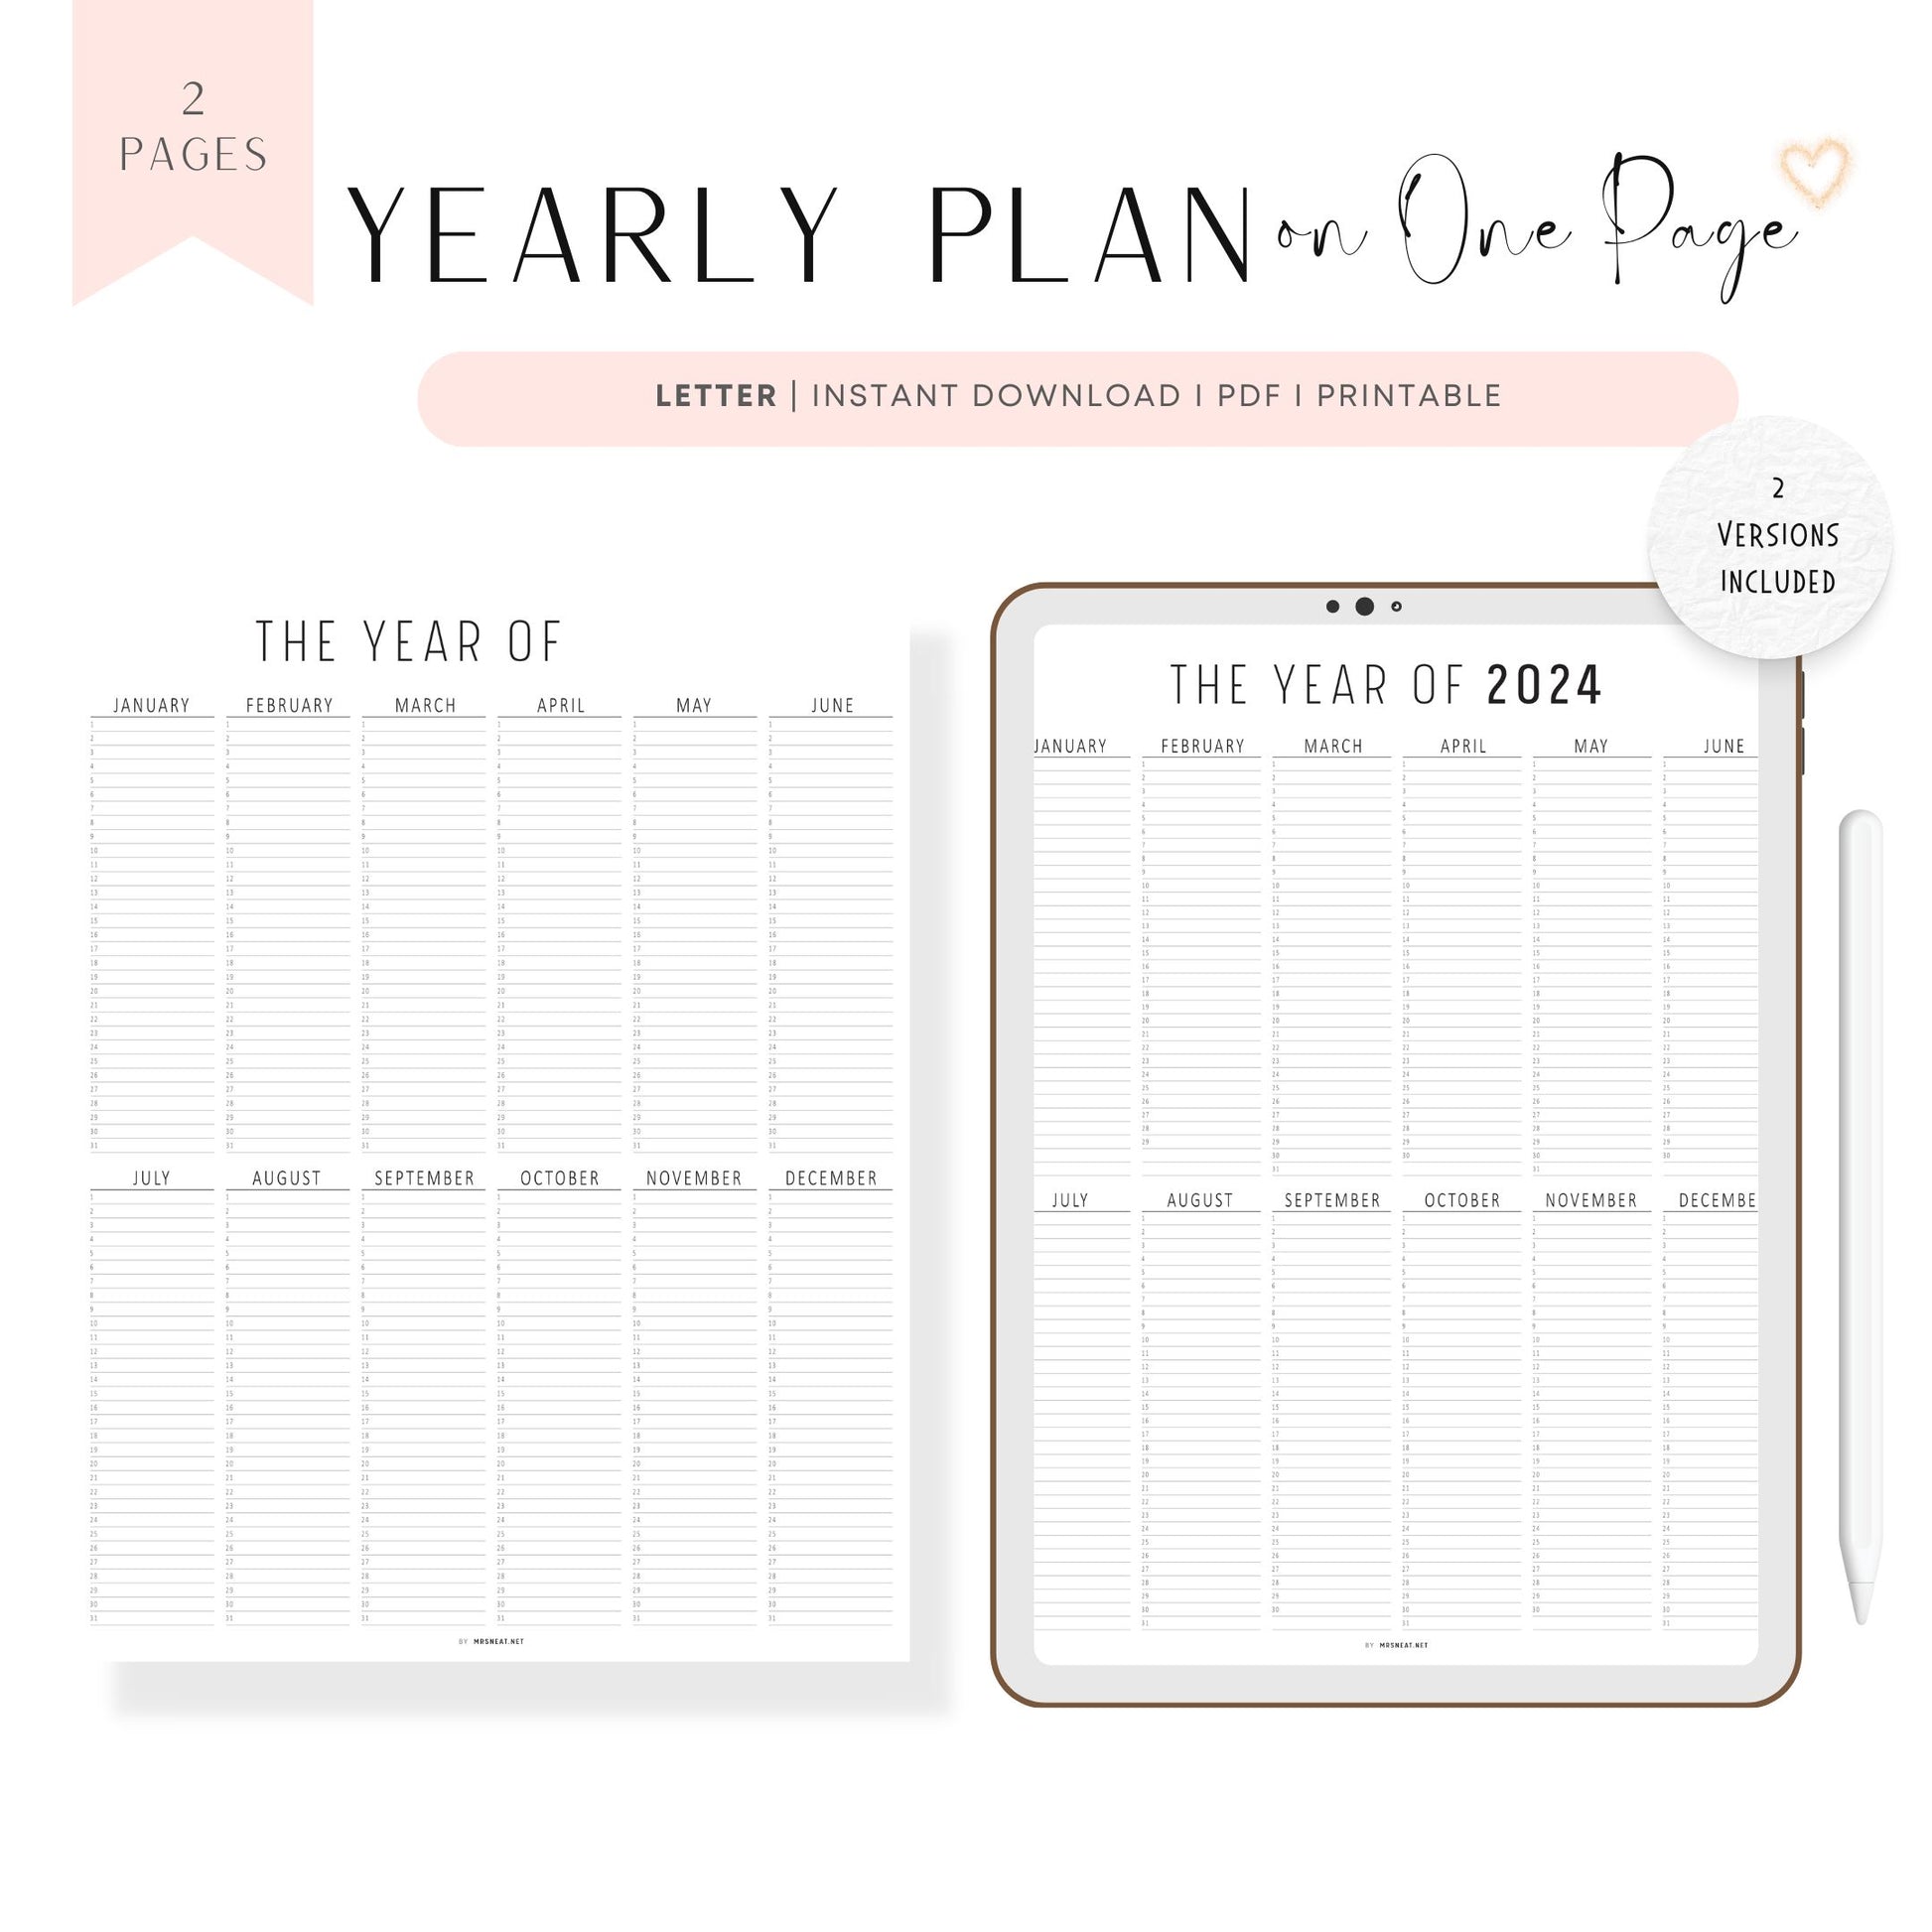 2024 Year at a Glance Template Printable, 365 days on One Page, Year at a Glance Planner Printable, Letter Size, 2 Versions, Blank version, 2024 Version